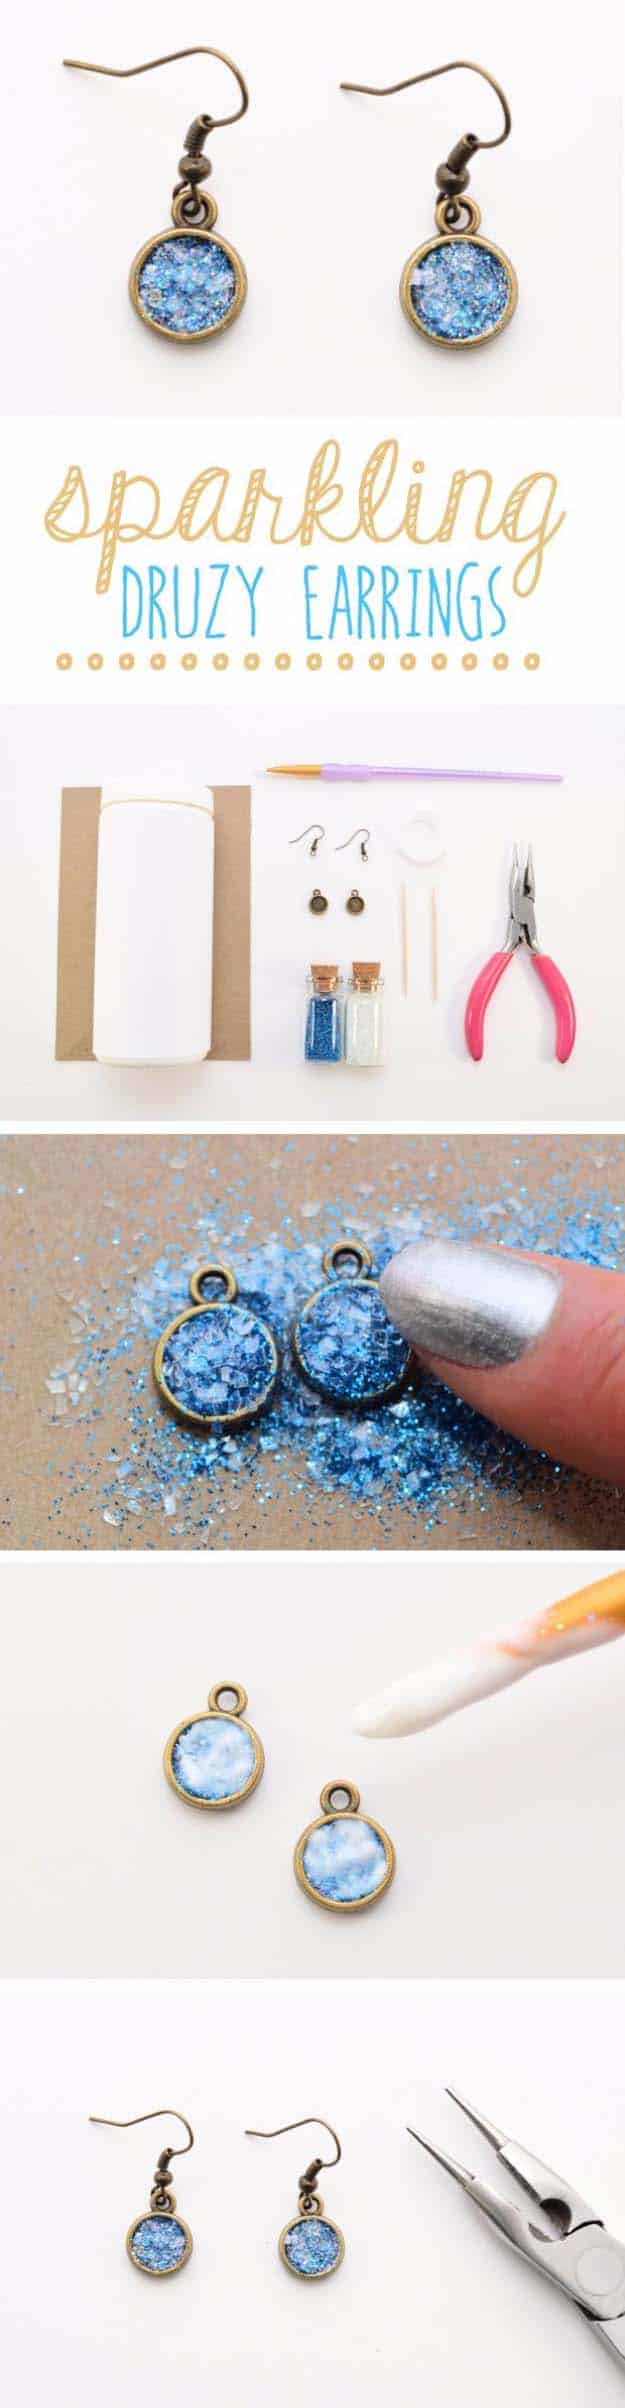 DIY Gifts for Your Girlfriend and Cool Homemade Gift Ideas for Her | Easy Creative DIY Projects and Tutorials for Christmas, Birthday and Anniversary Gifts for Mom, Sister, Aunt, Teacher or Friends | Sparklng Glitter Druzy Earrings for Cool Homemade DIY Fashion #diygifts #diyideas 